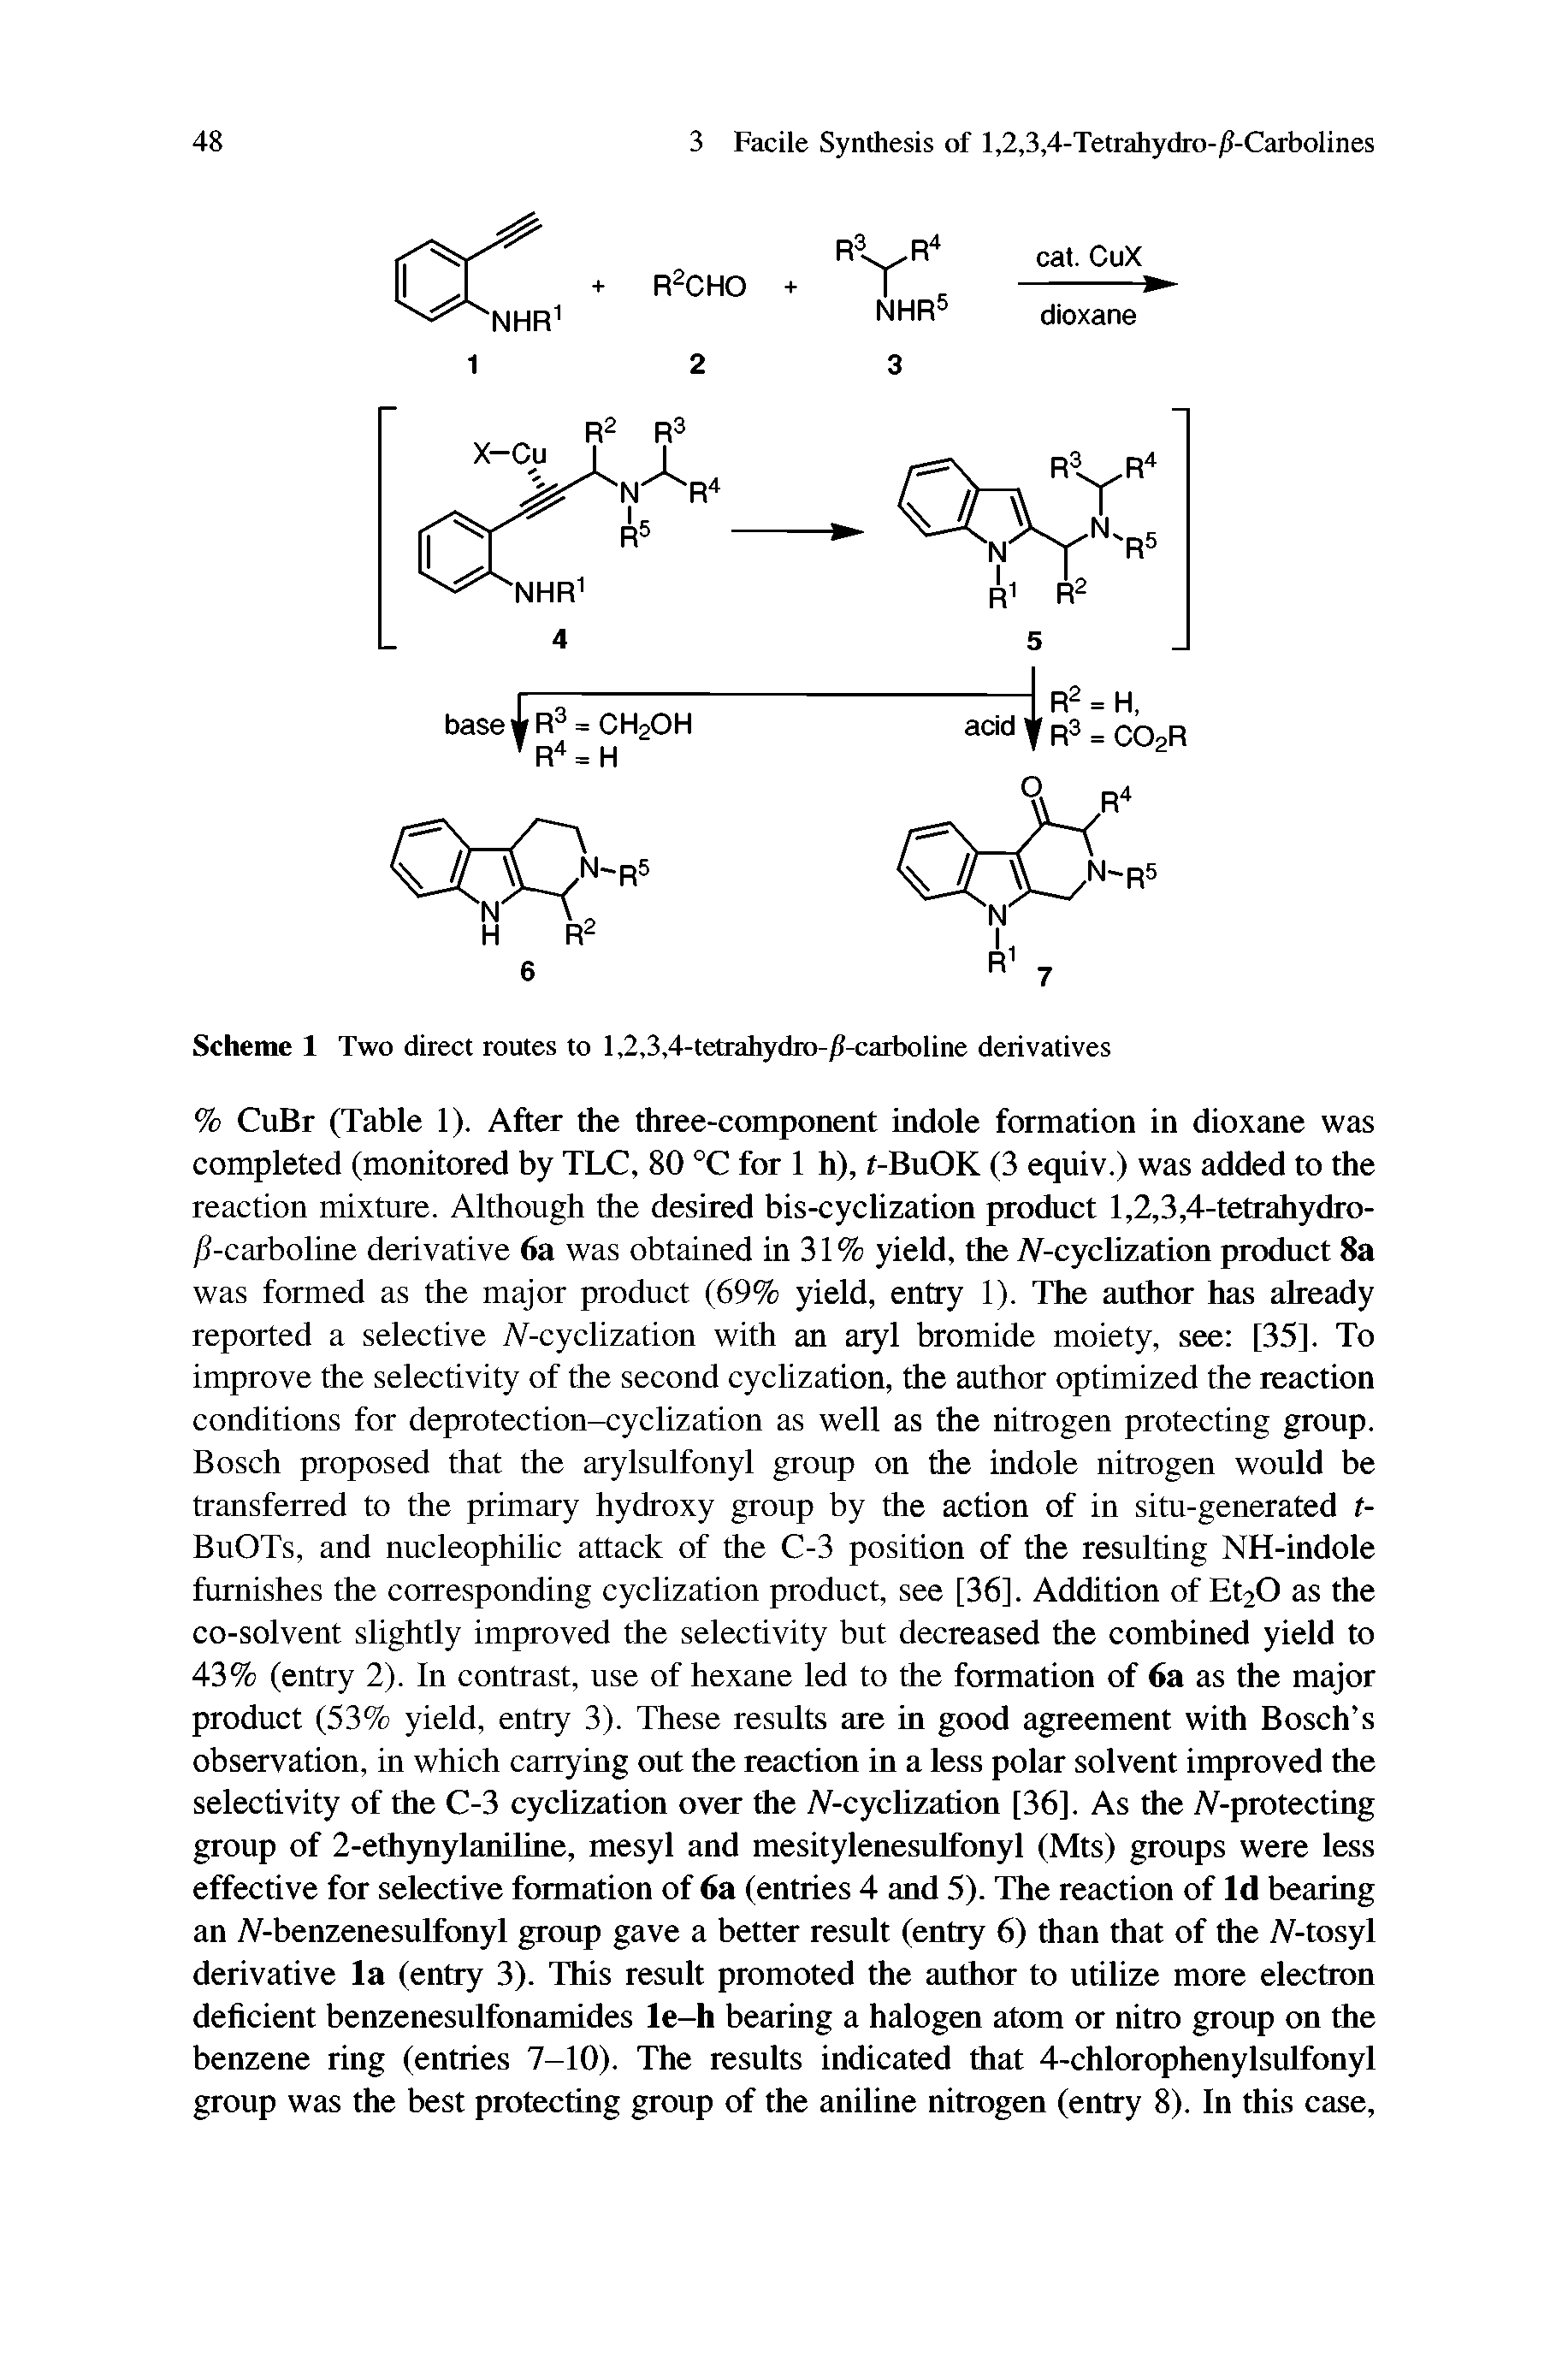 Scheme 1 Two direct routes to l,2,3,4-tetrahydro-/ -carboline derivatives...